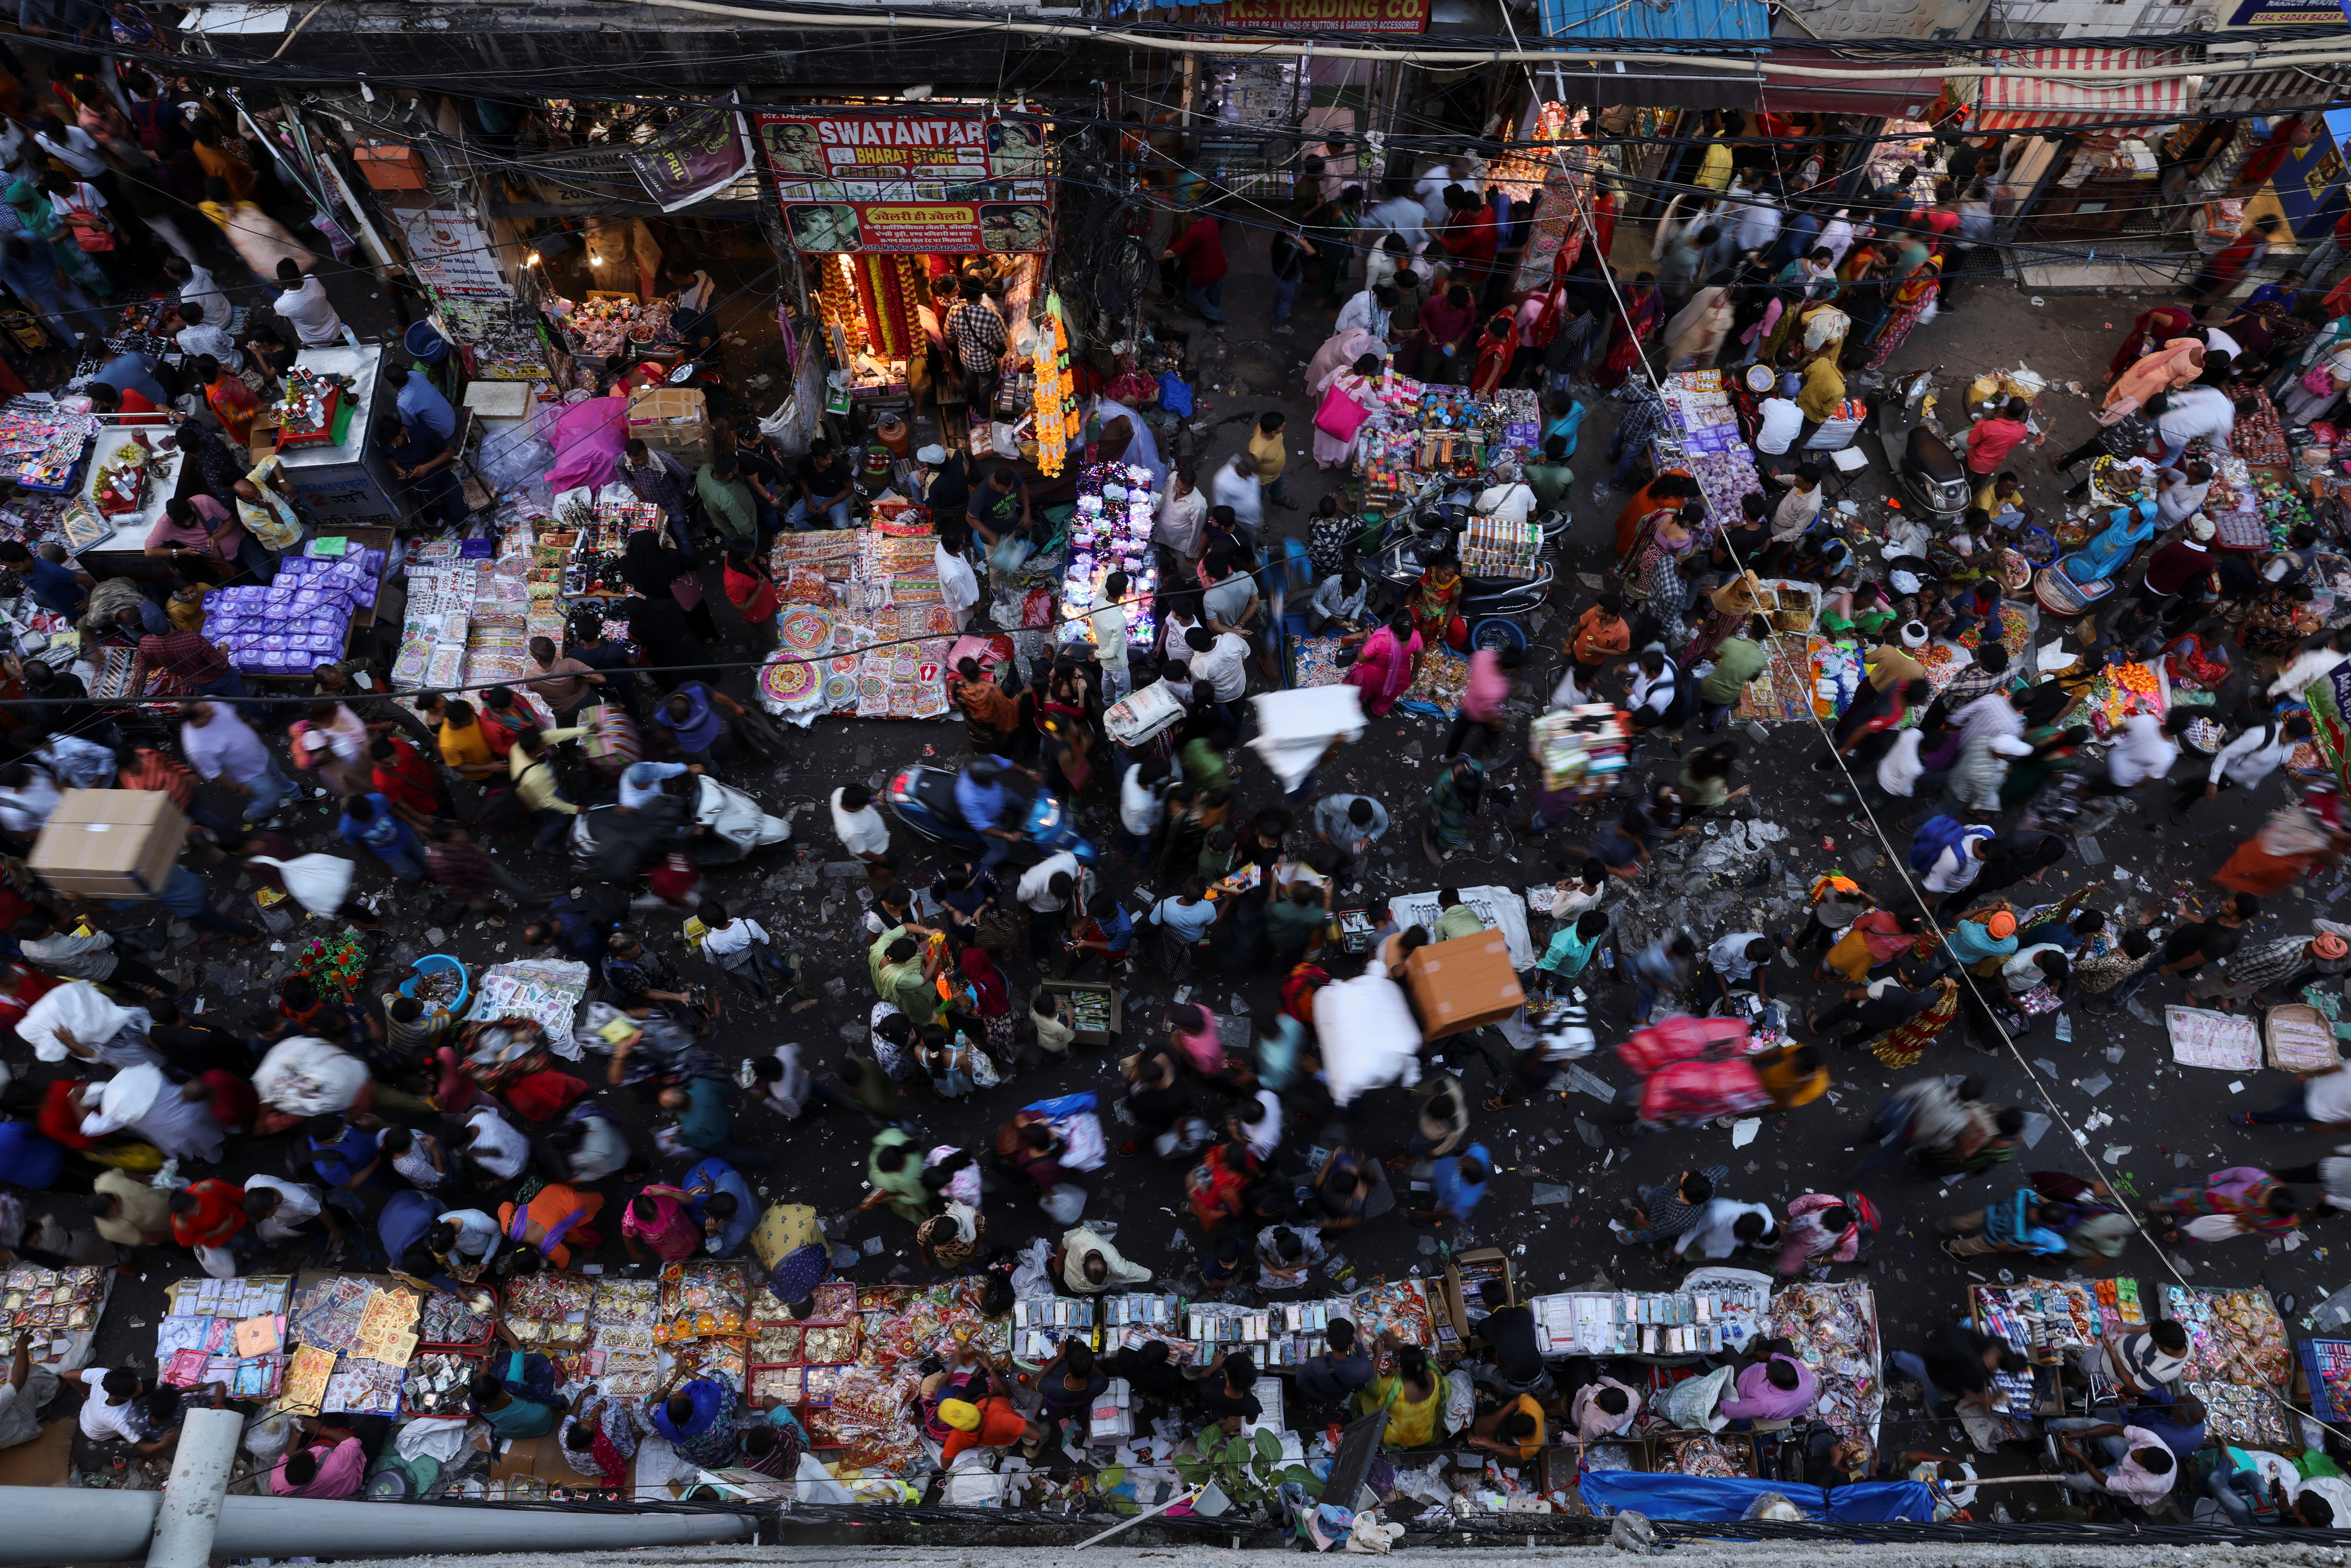 People shop at a crowded market ahead of Diwali, the Hindu festival of lights, in the old quarters of Delhi